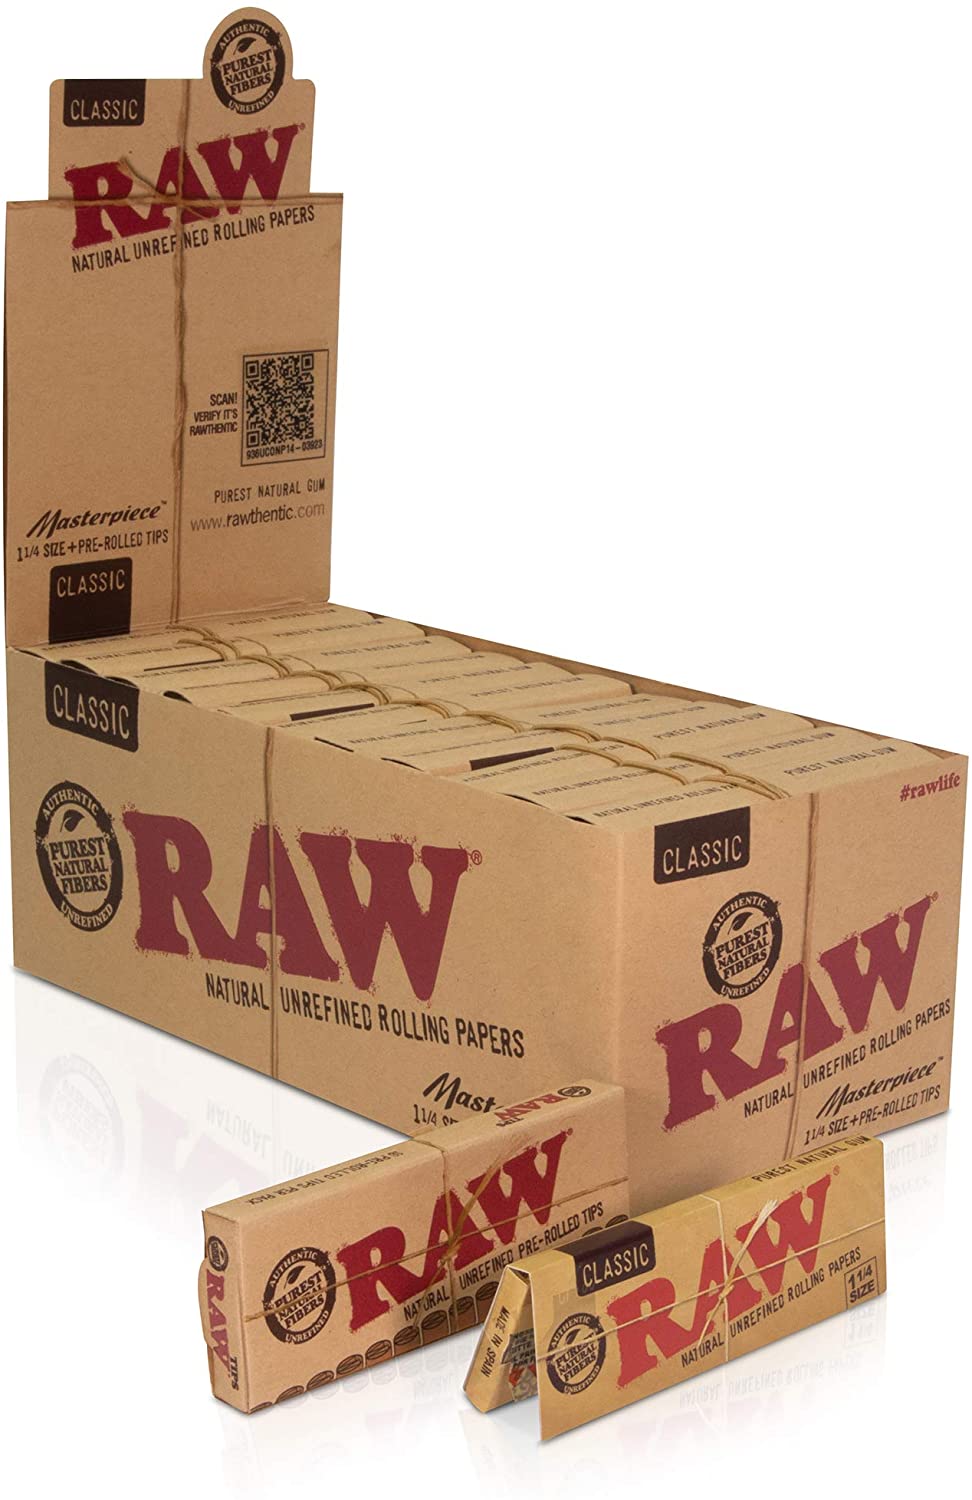 RAWthentic Masterpiece 1 1/4 Classic Rolling Paper with Re-Usable Pre-Rolled Tips | 24 Packs